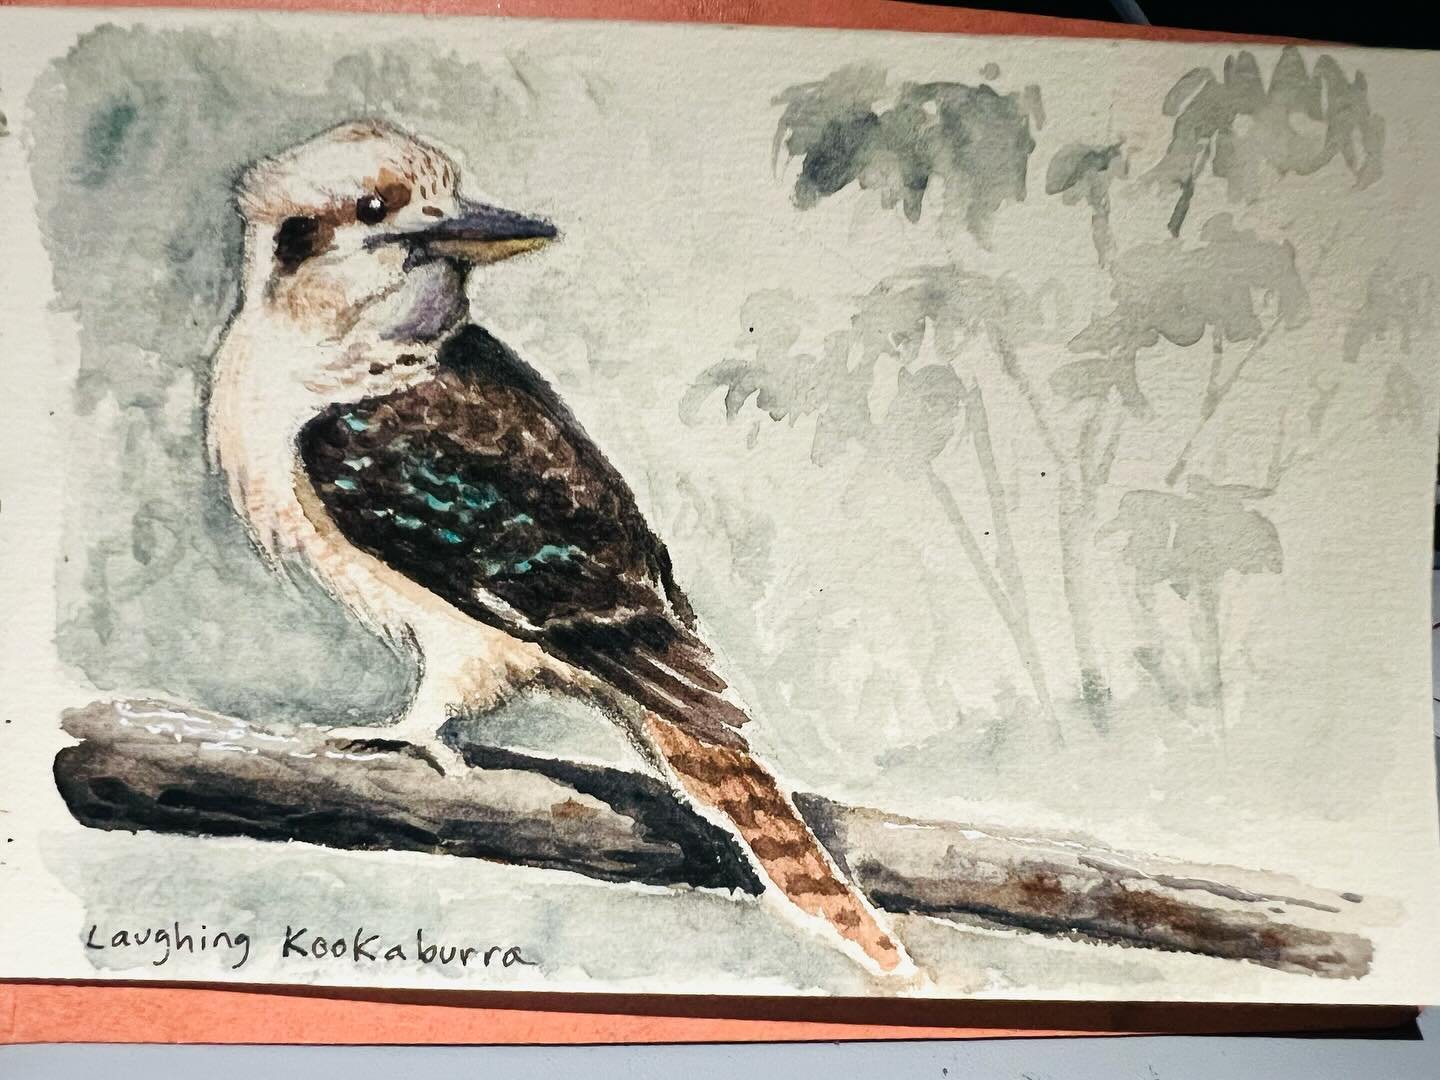 One good thing about long flights is they allow me to catch up on my travel journal paintings! Laughing Kookaburra from our adventures down under #travelsketchbook #watercolorpainting #solongaustraliaimgoingtomissyou